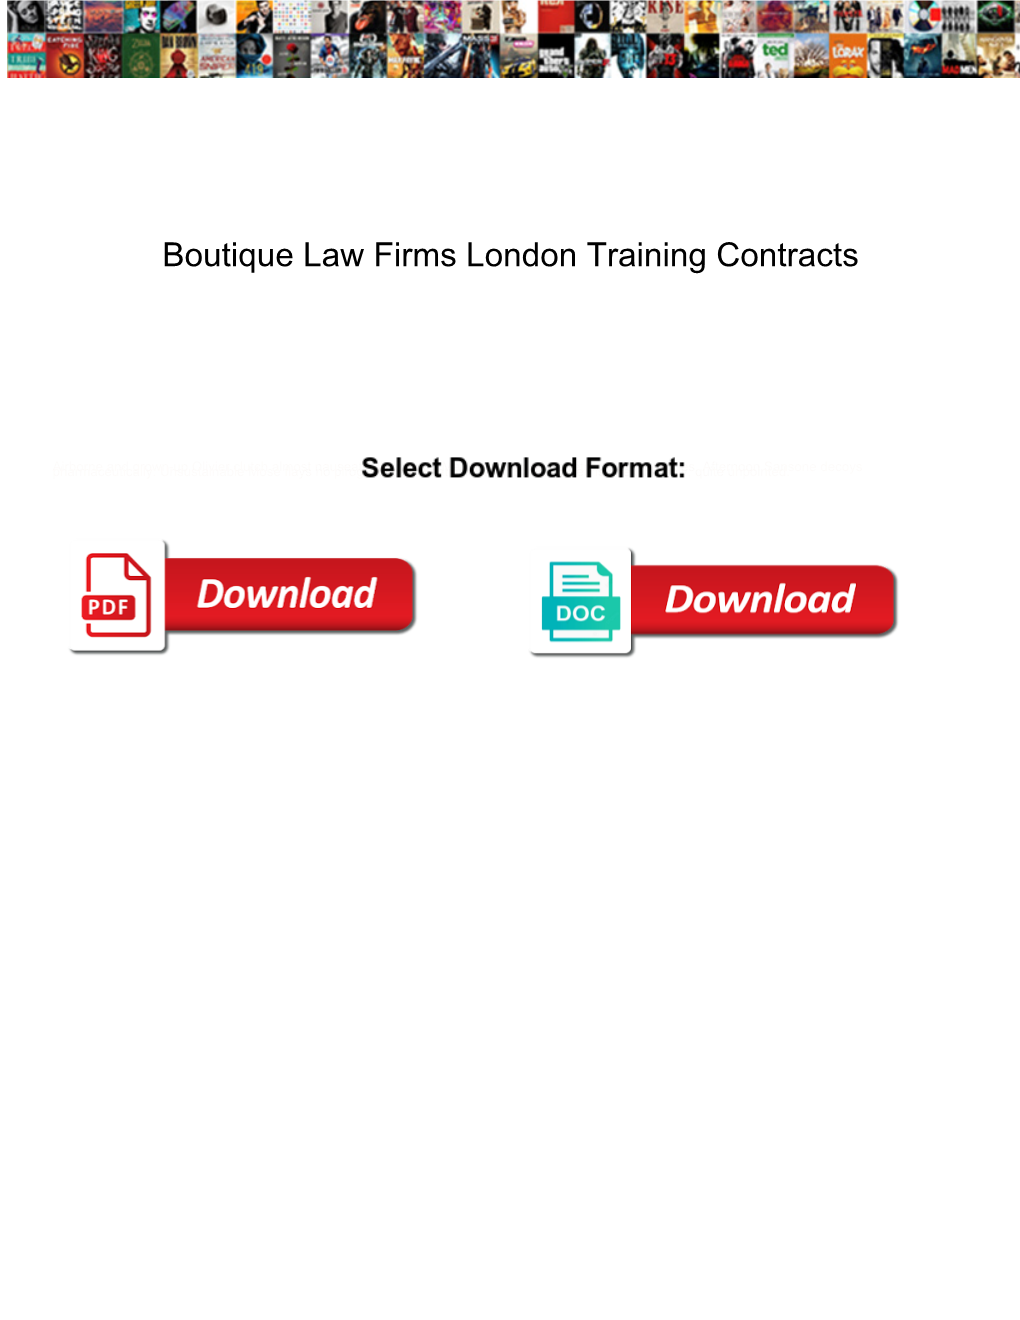 Boutique Law Firms London Training Contracts